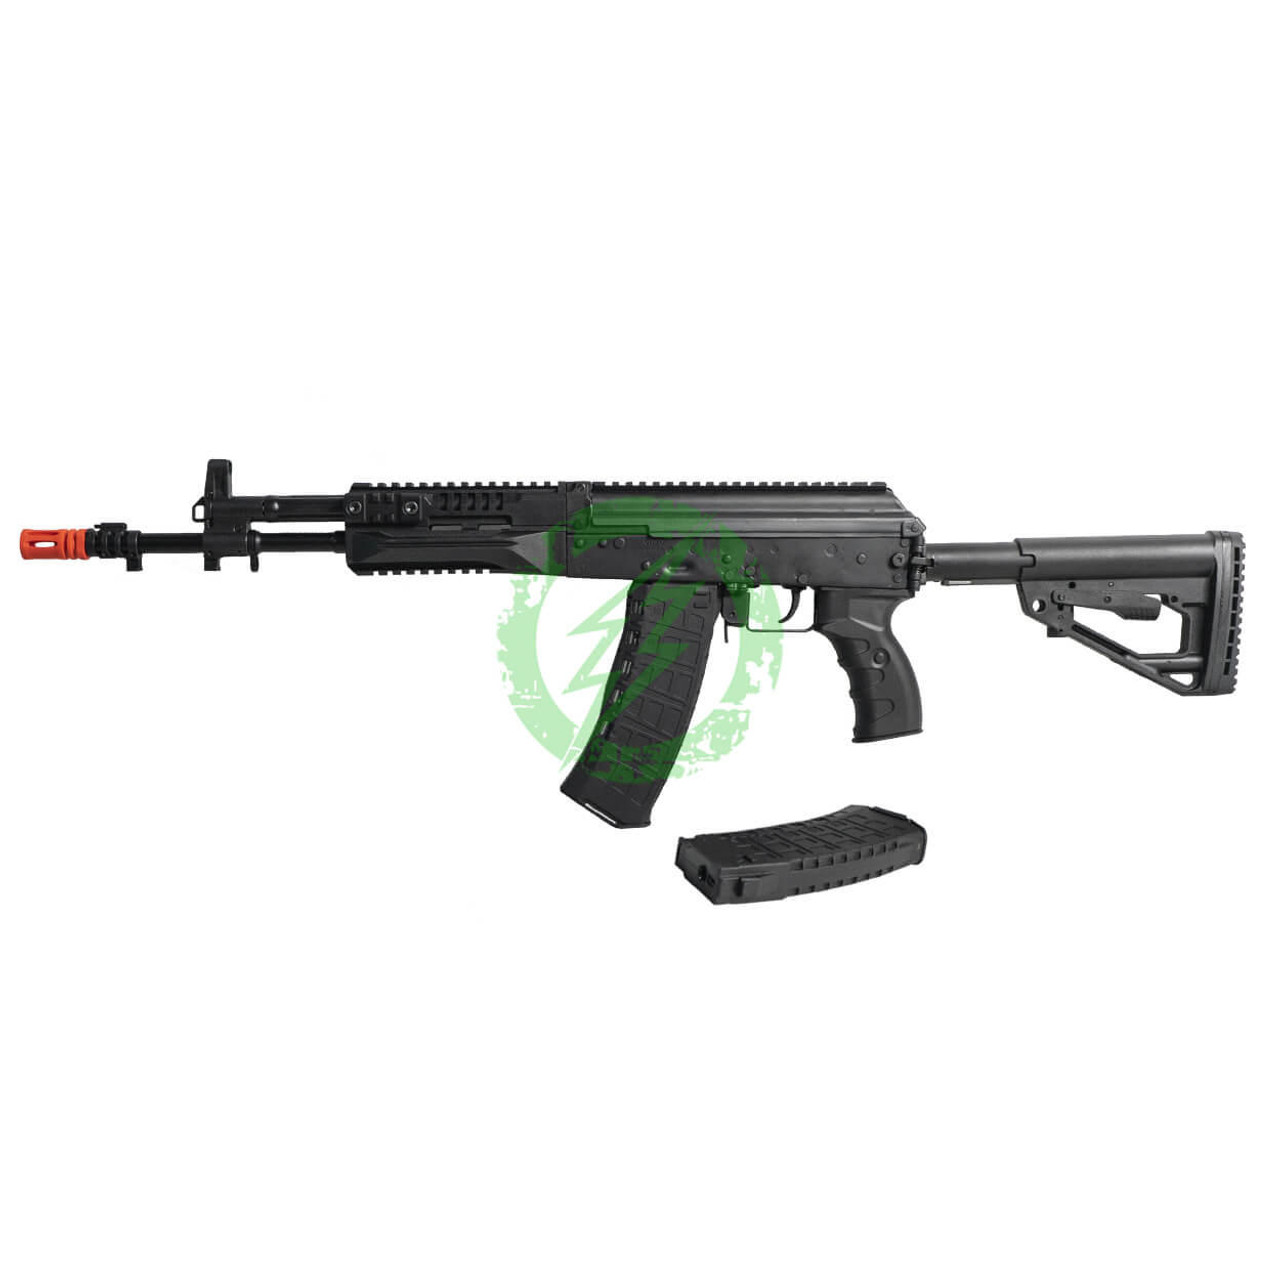  Arcturus AK12 Steel Bodied Modernized Airsoft AEG Rifle Upgraded with MOSFET 